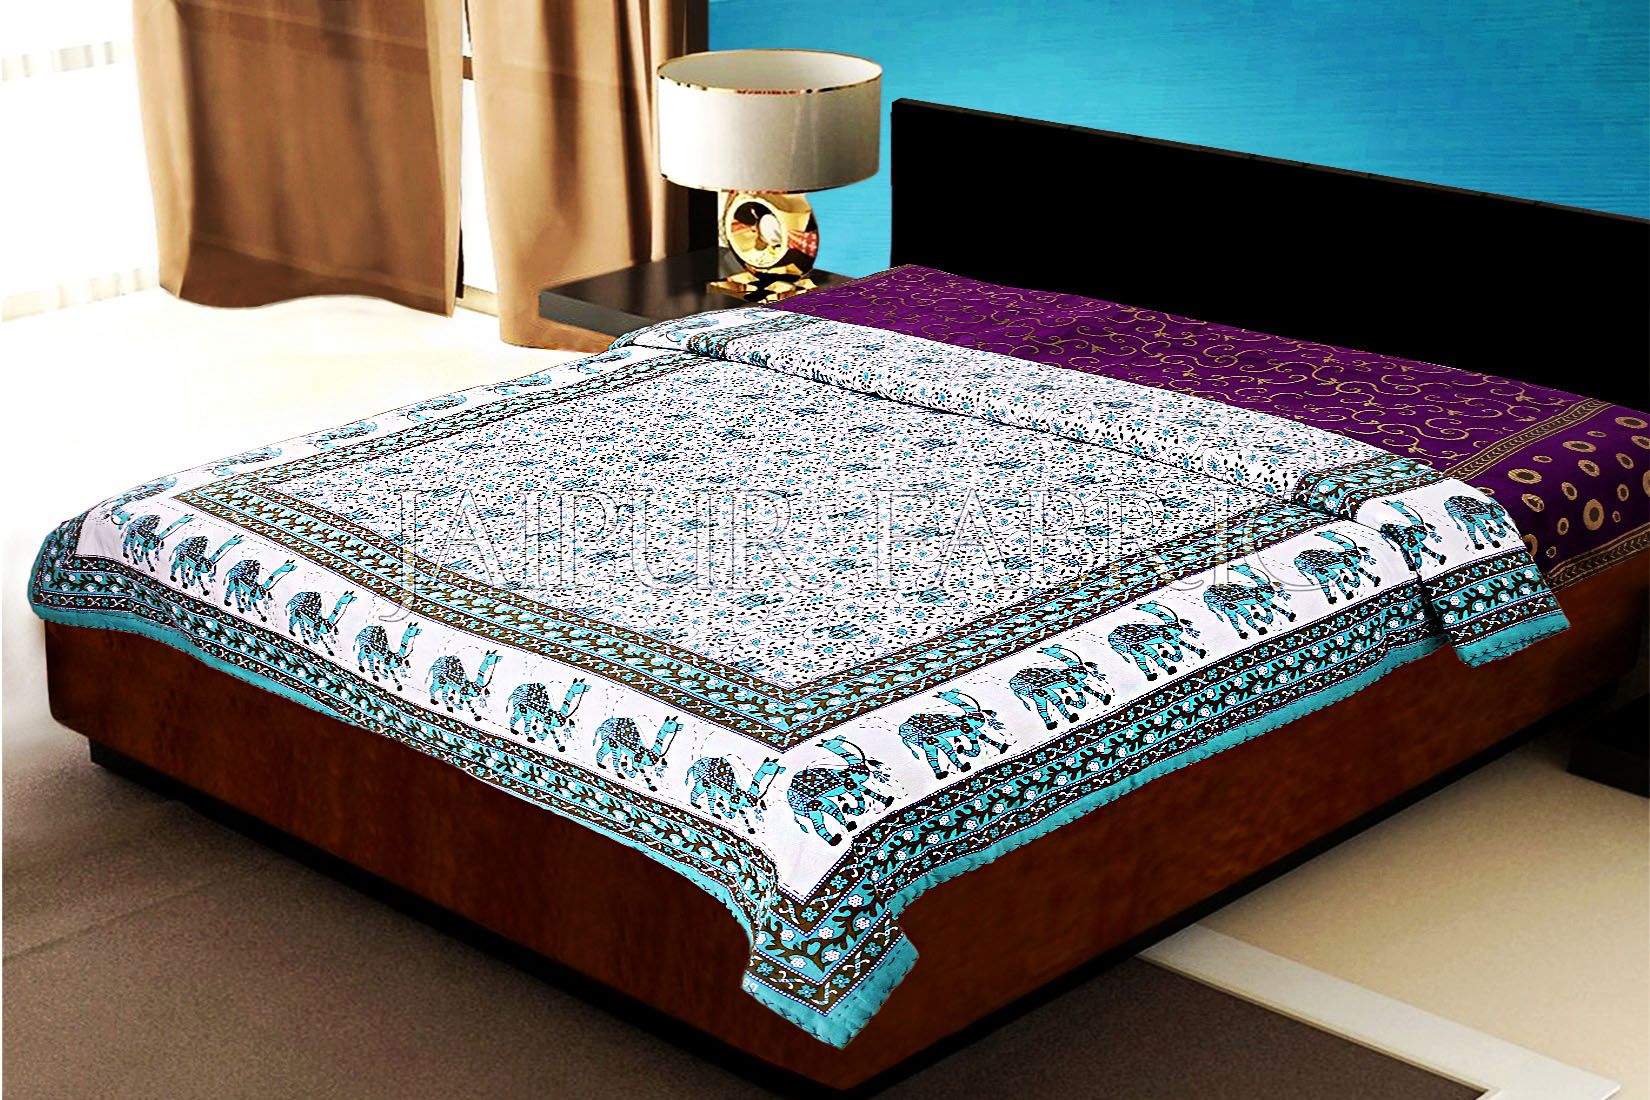 Green Rajasthani Camel Border Flower Print Cotton AC Double Bed Quilt